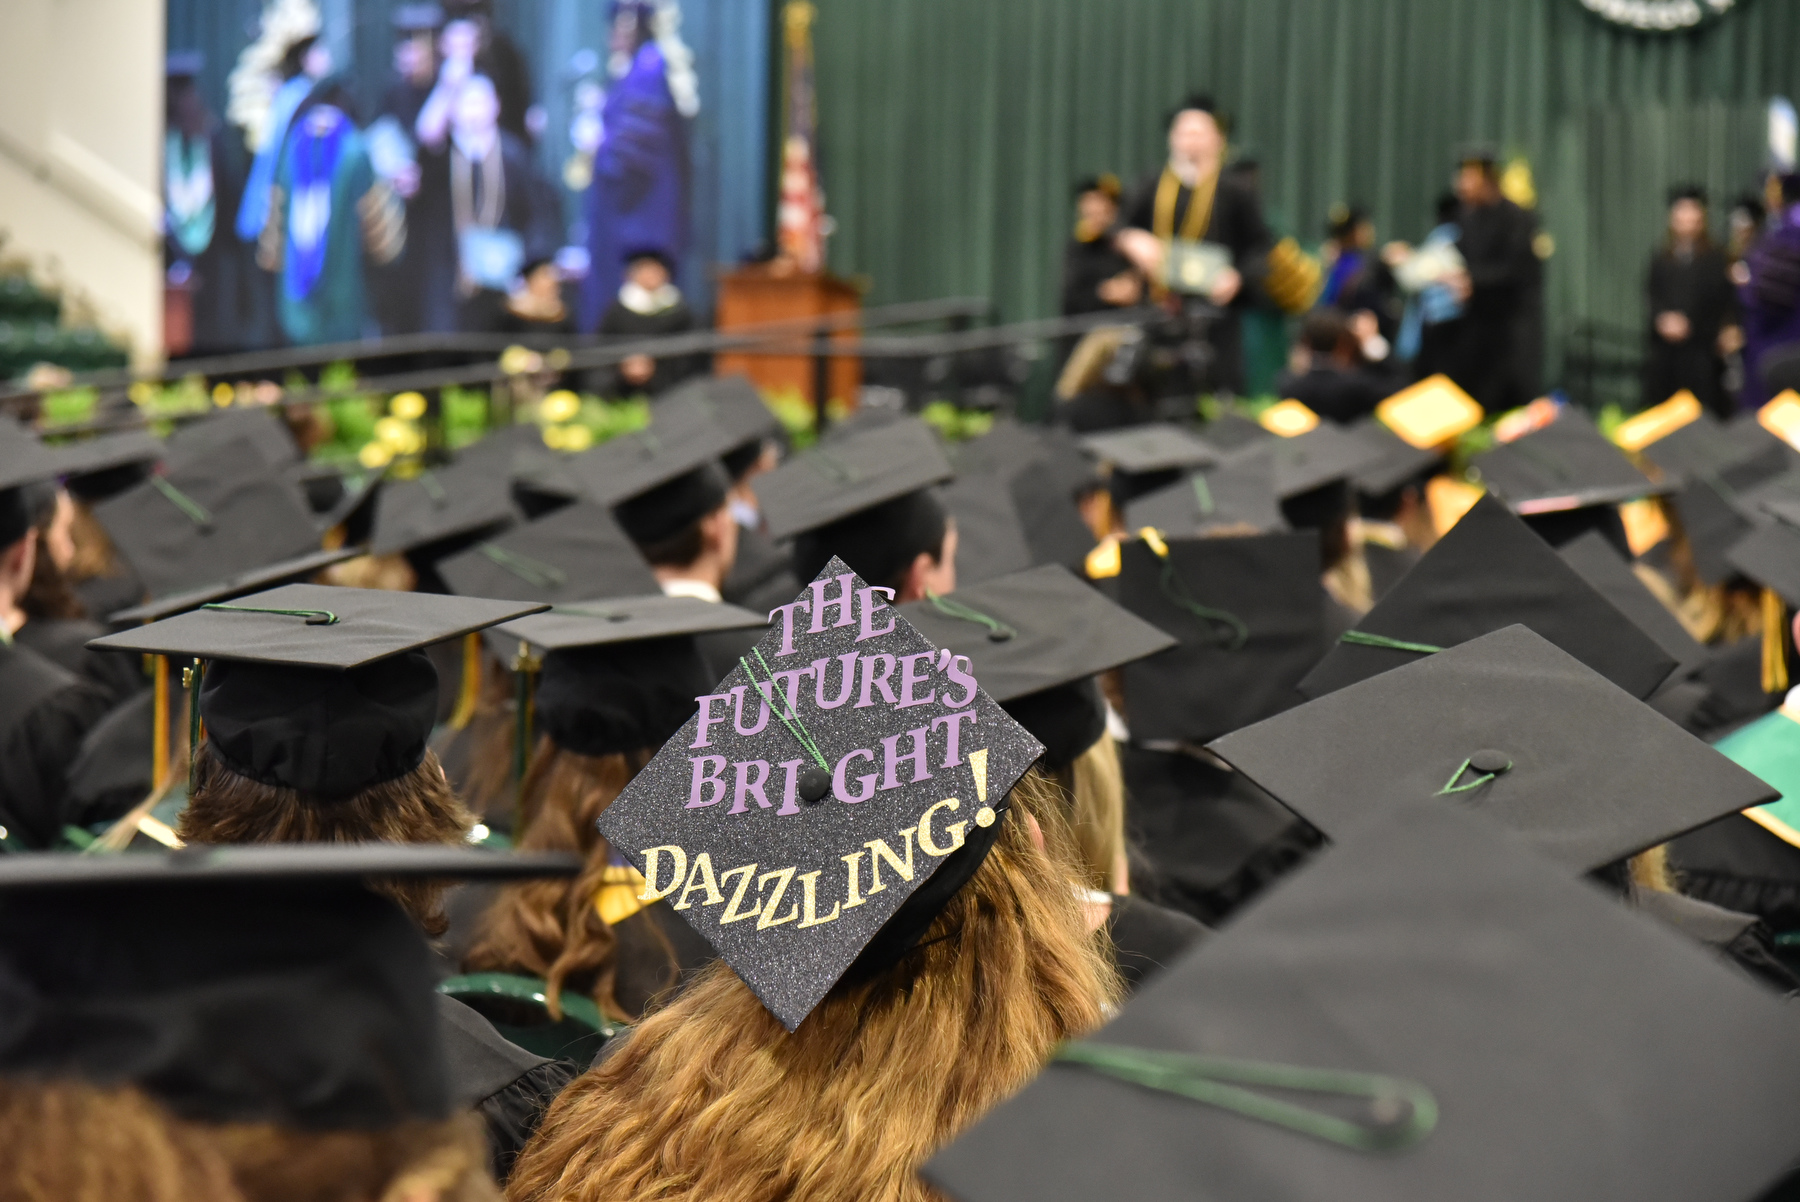 A graduate’s cap message looks forward to a bright and dazzling future.